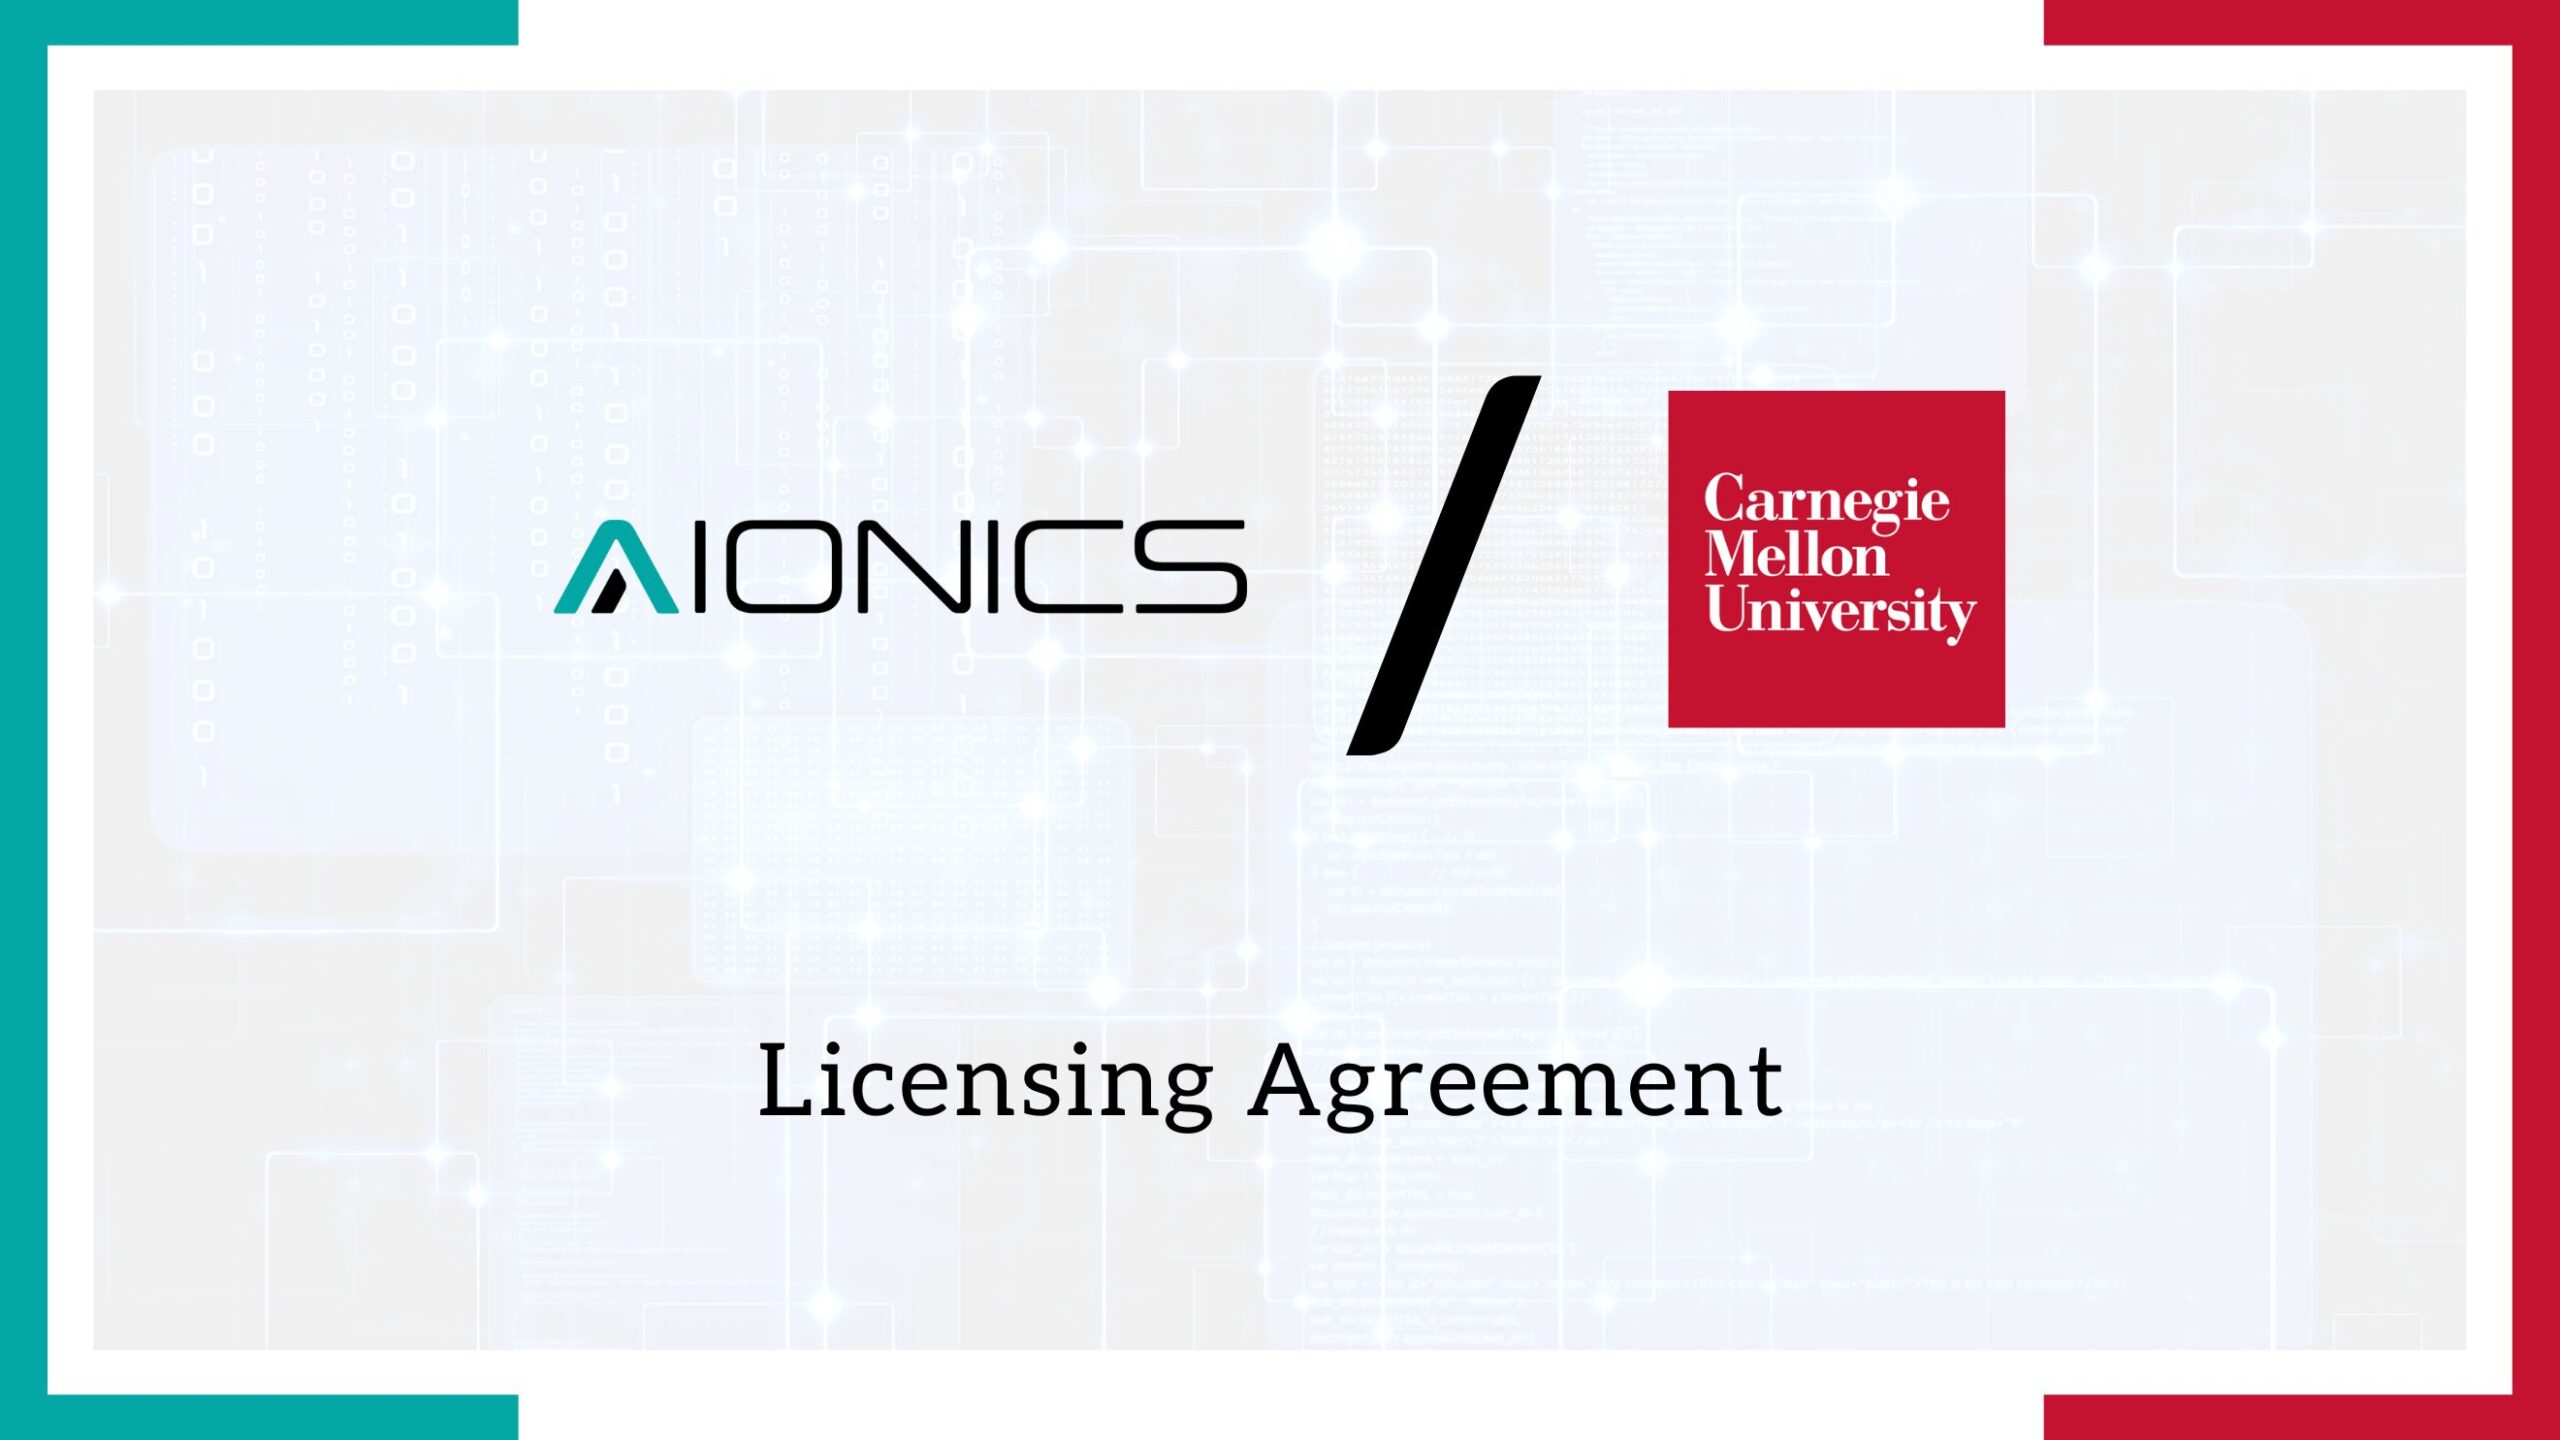 Aionics, Inc. and Carnegie Mellon University Announce Licensing Agreement for Breakthrough Battery Electrolyte Design Software